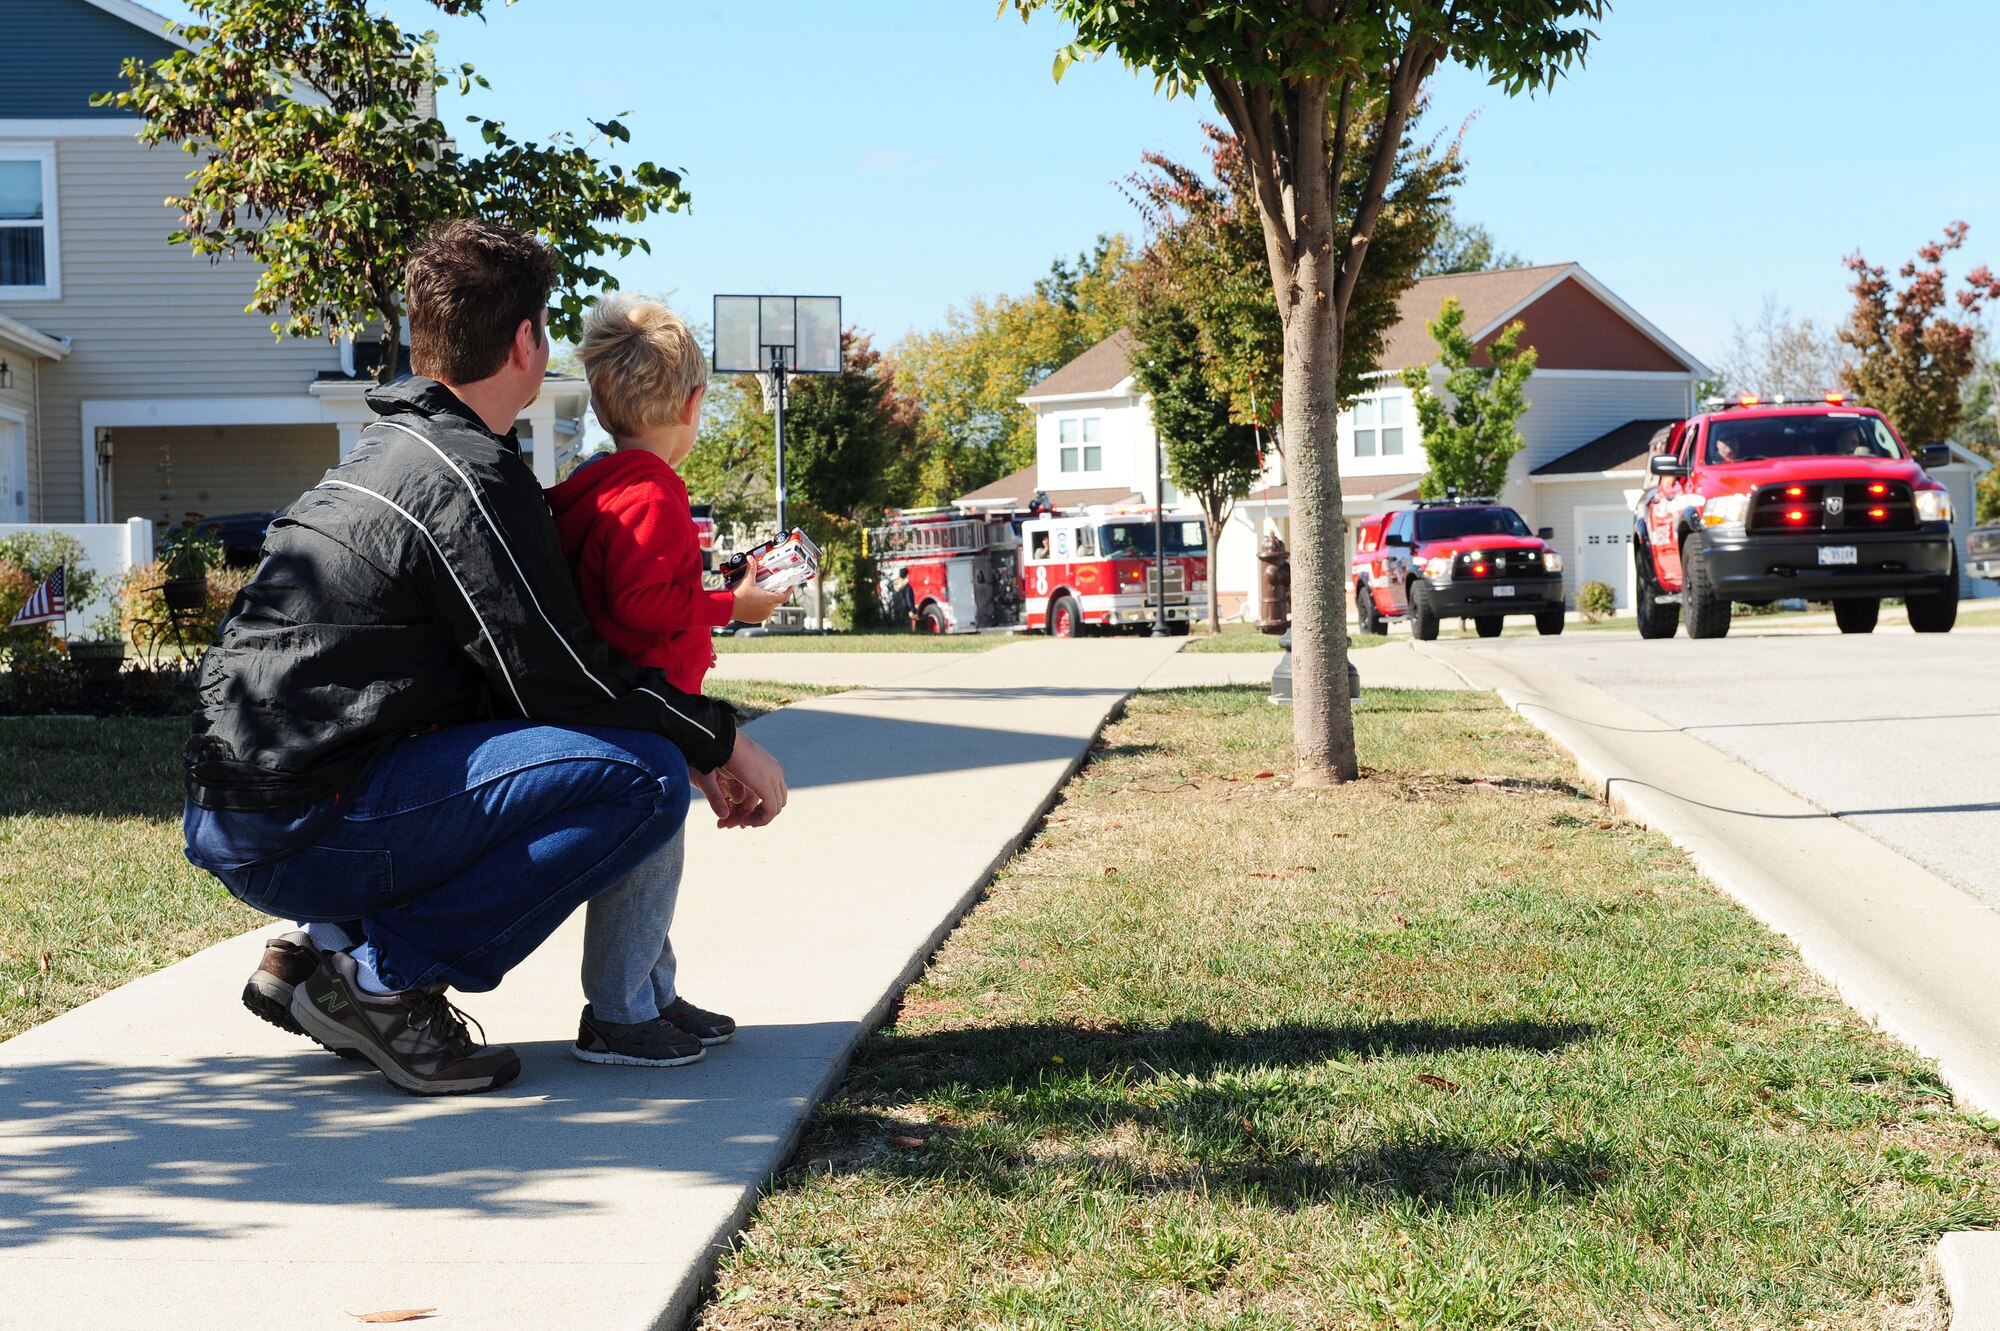 Base residents line the sidewalks to witness the annual Fire Prevention Parade Oct. 10, 2015, at Whiteman Air Force Base, Mo.  Fire trucks from Whiteman and the local communities drove around base with Smokey the bear, Sparky the dog and J.B. the fireman and greeted residents with handfuls of candy.  Following the parade, the Whiteman Fire Department hosted activities in the commissary parking lot which carried a theme of teaching how to prevent and respond to fires in the home. (U.S. Air Force photo by Airman 1st Class Jazmin Smith)